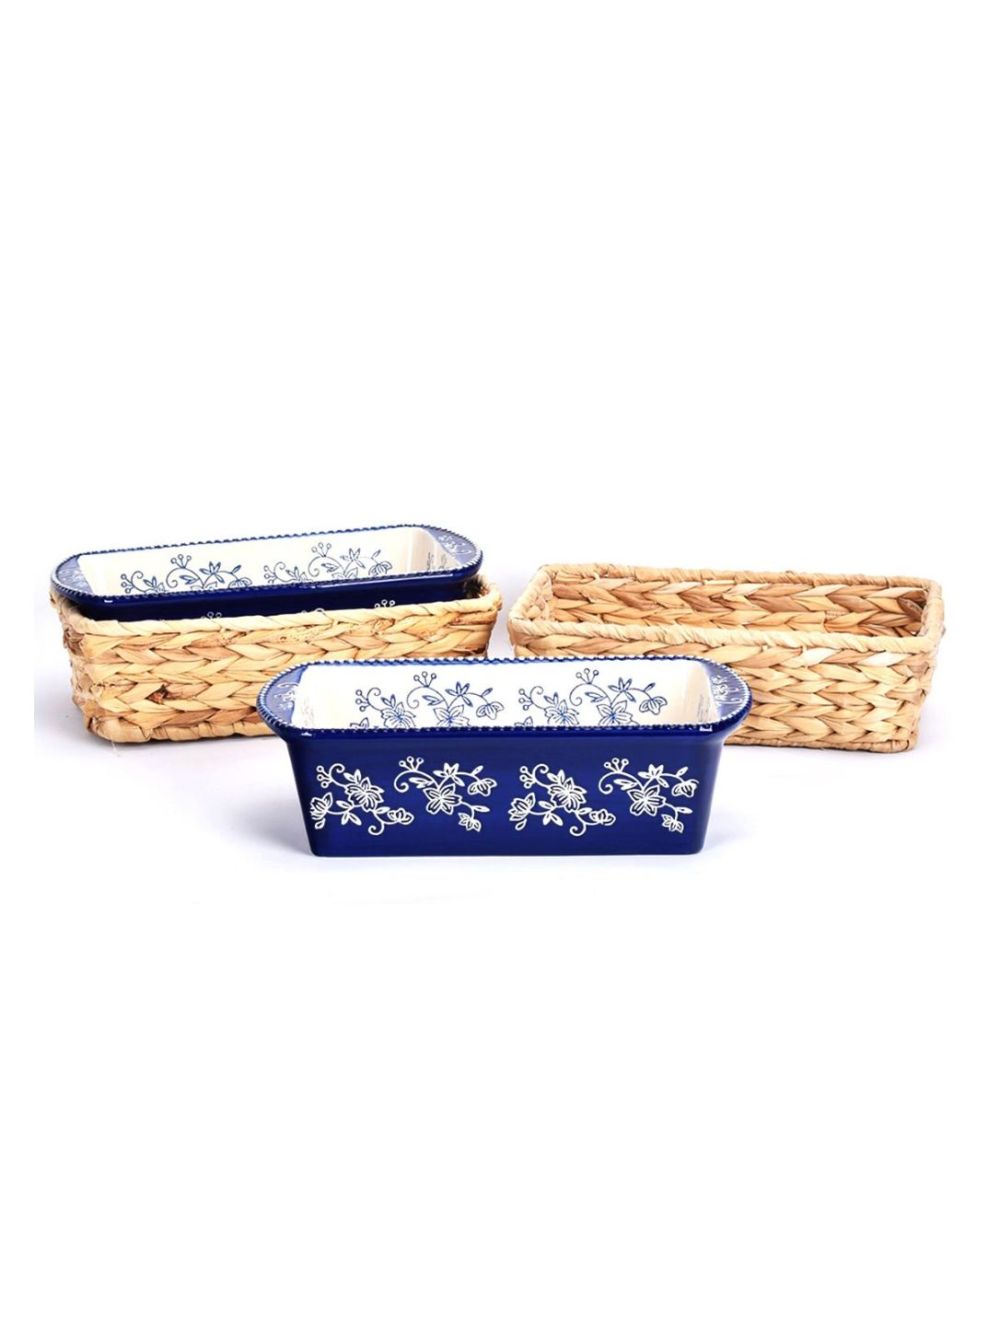 Temp-tations Floral Lace Loaf Pans in Baskets - 4 Piece-K50766-011